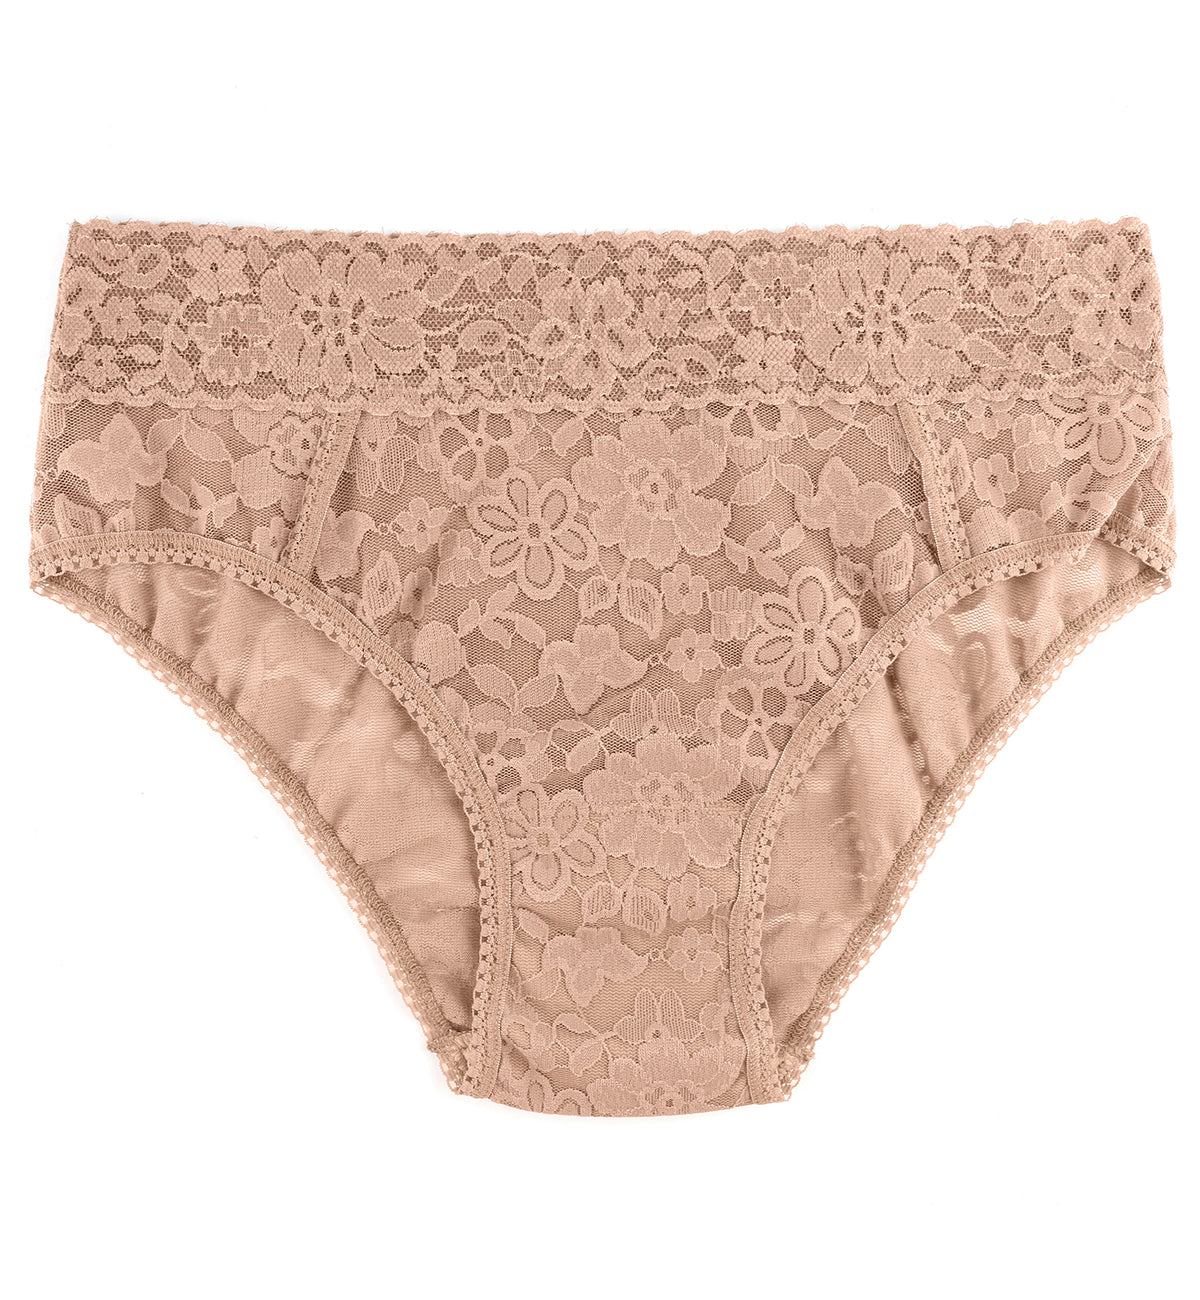 Hanky Panky Daily Lace Girl Brief (772441),XS,Taupe - Taupe,XS